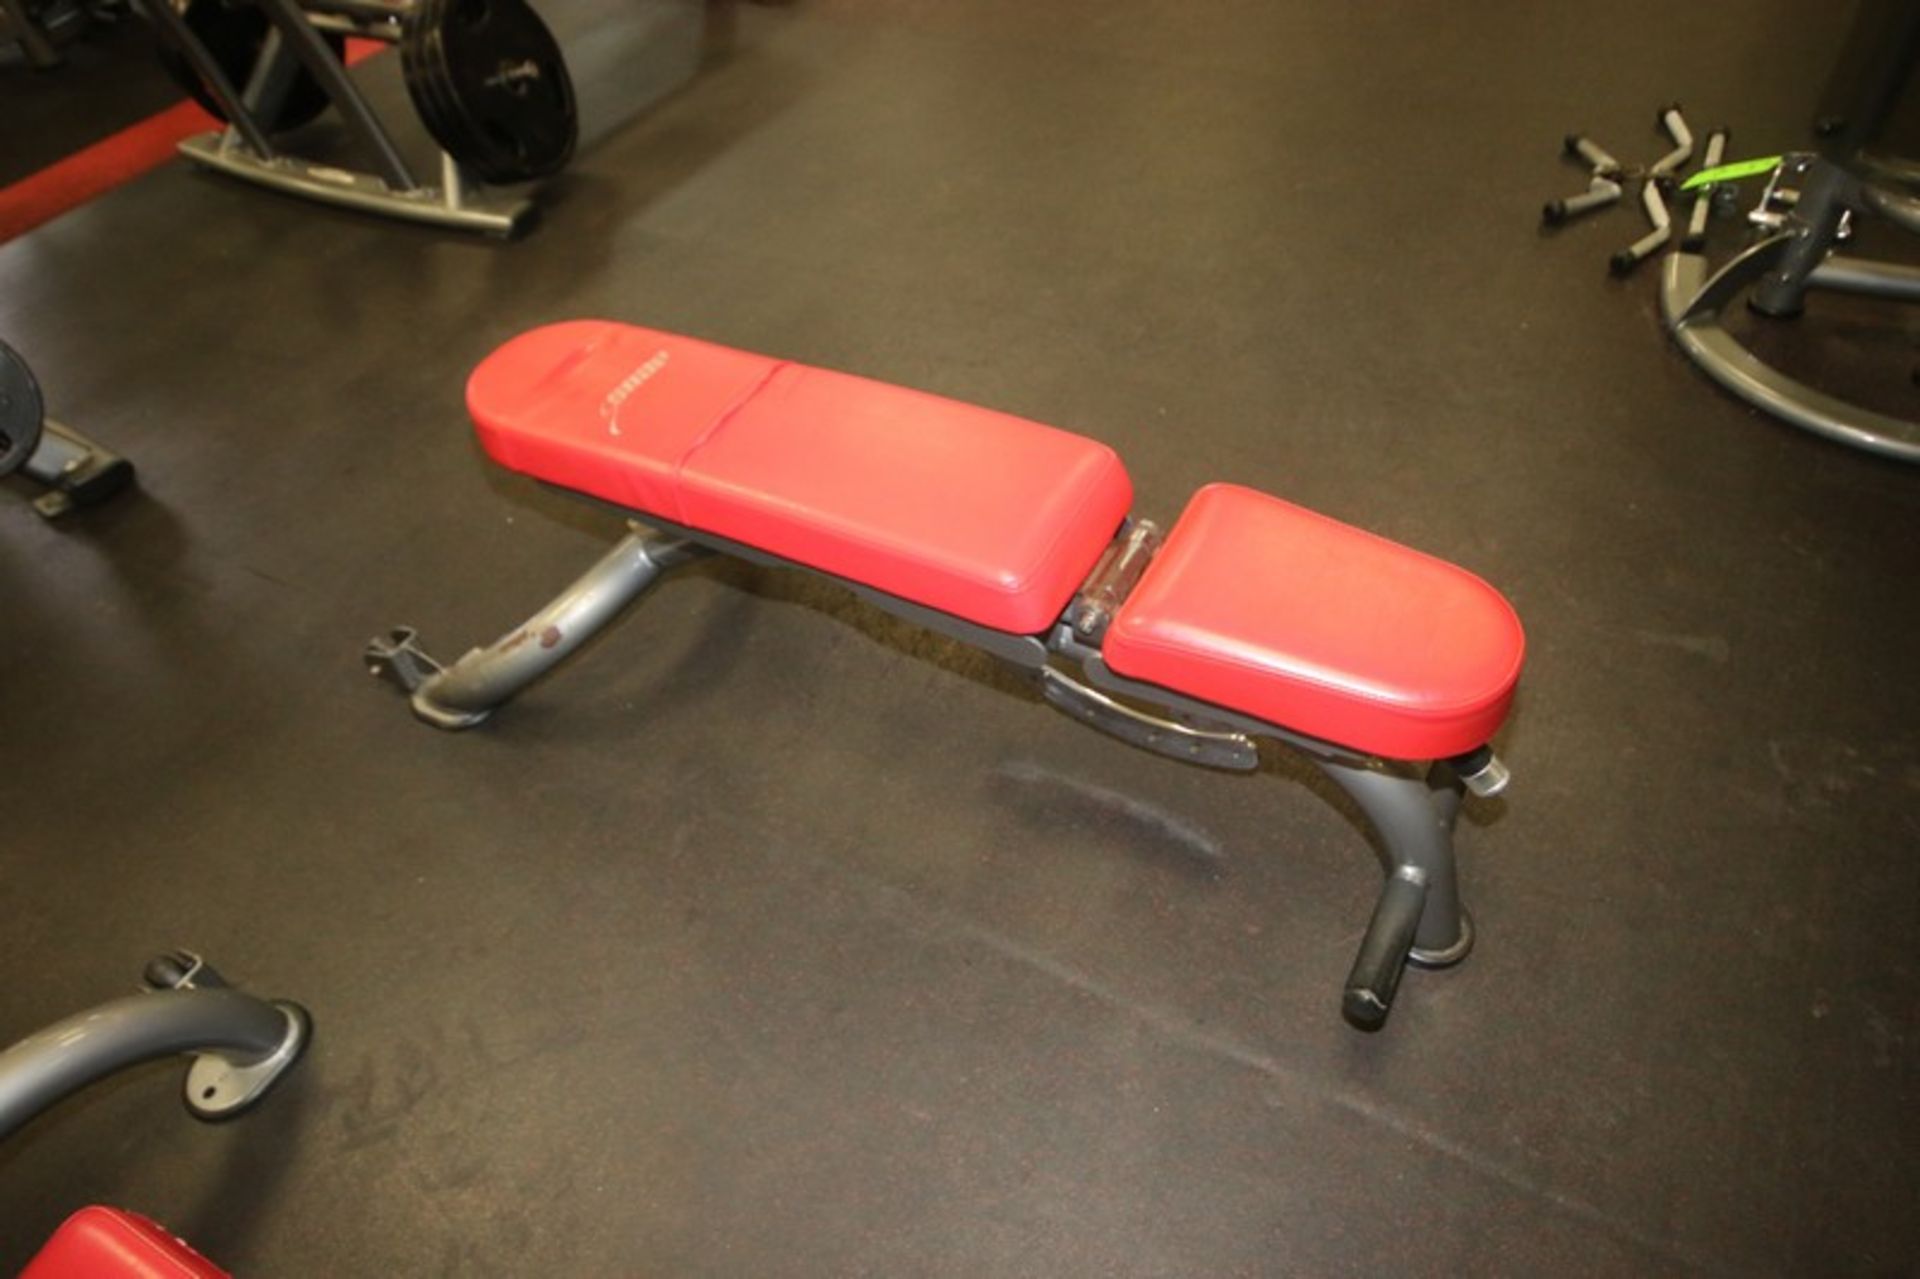 Fitness Bench, with Adjustable Back & Seat, with (2) Wheels on Frame, Bench Total Length: Aprox. 53" - Image 2 of 2